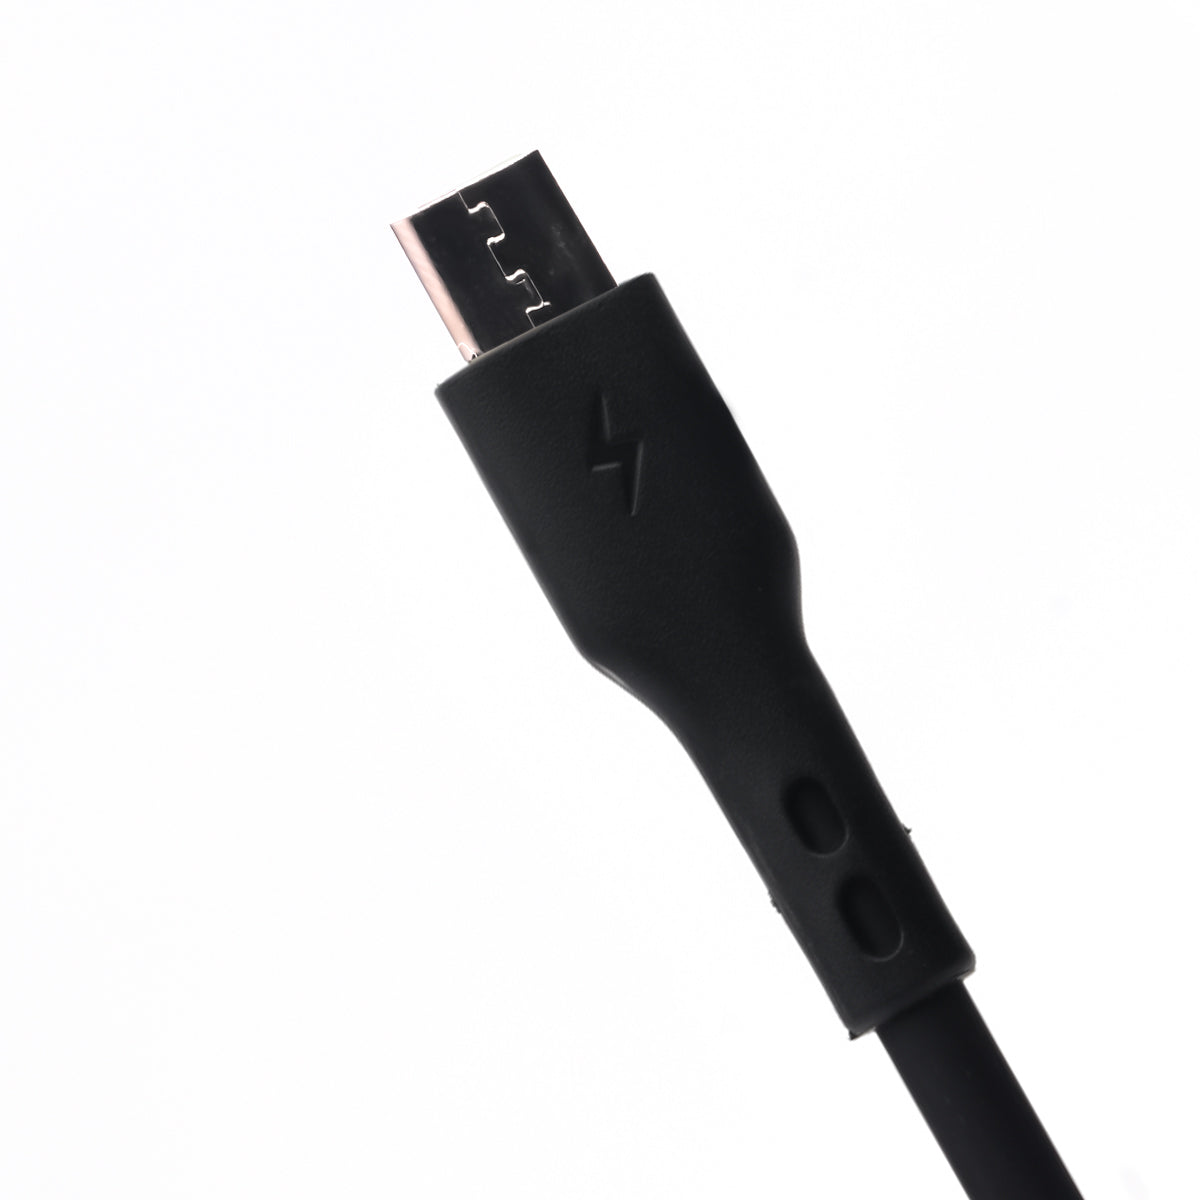 Heatz ZCT12 Type C 3.0 A Fast Charging Cable - Black